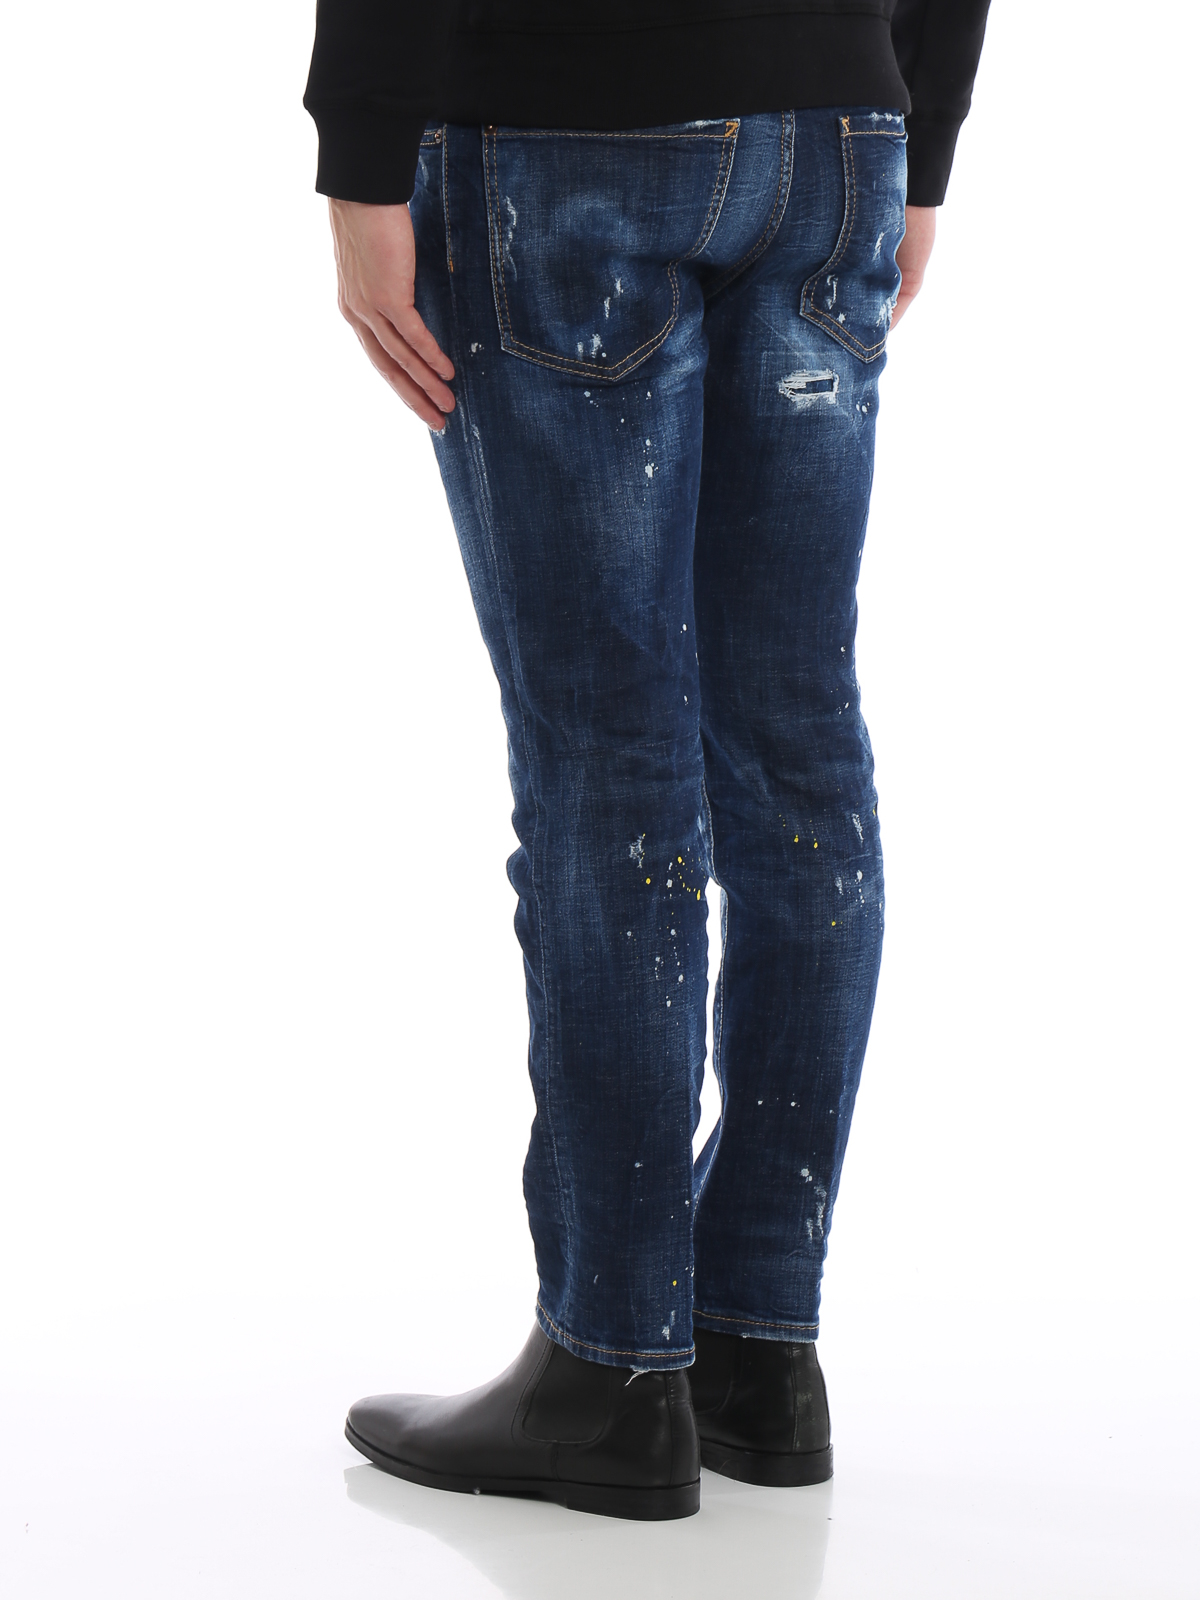 dsquared2 jeans online shopping